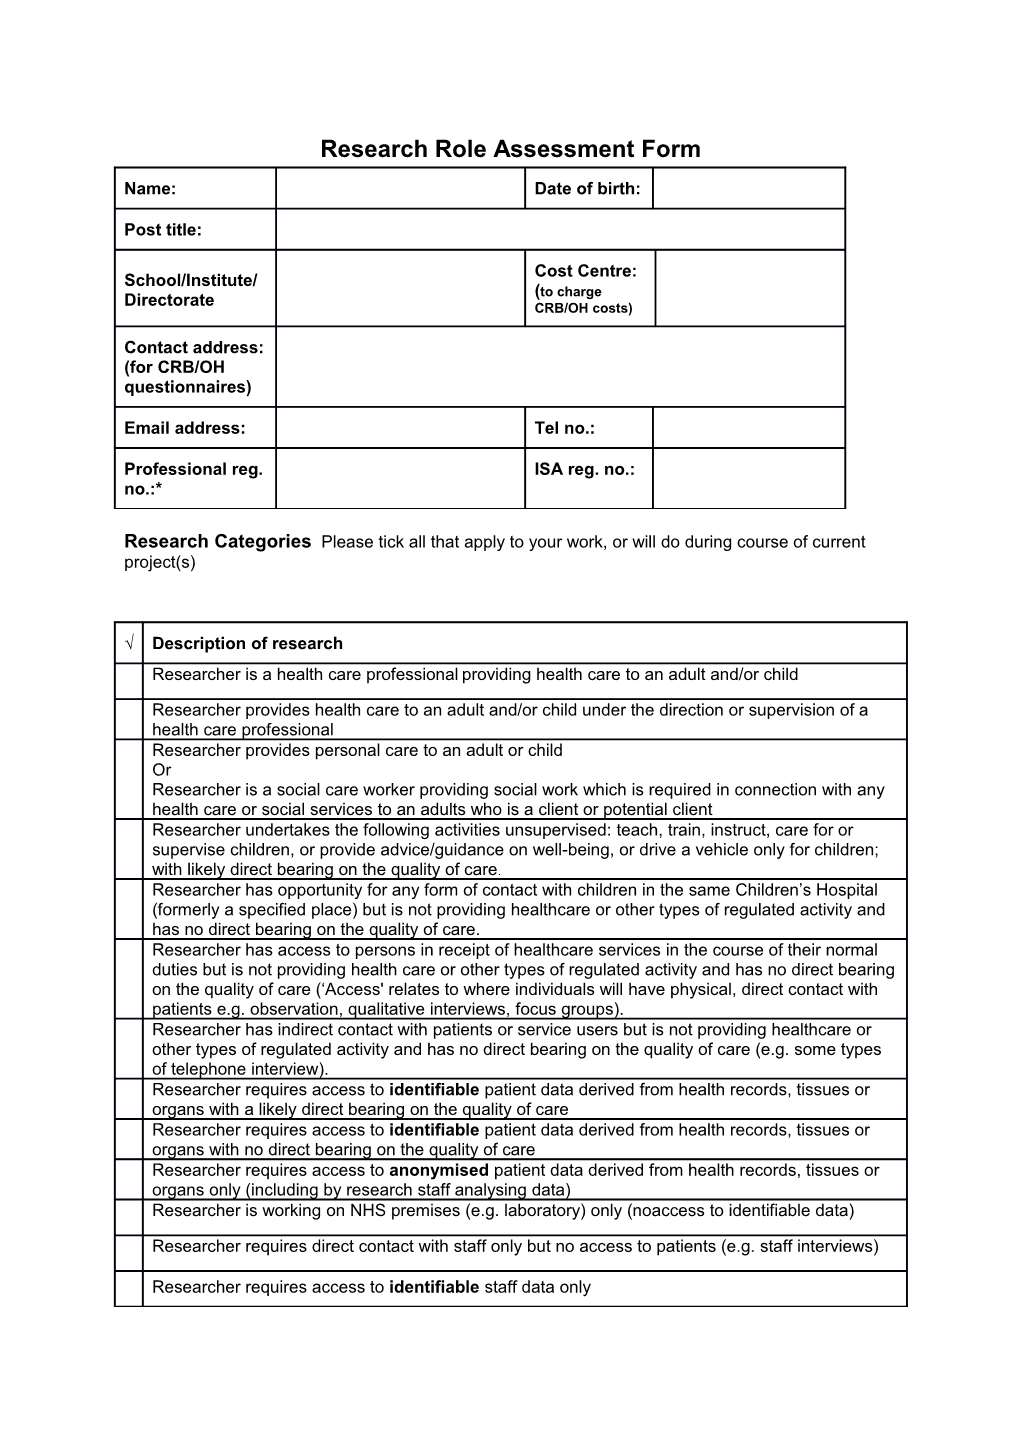 Research Role Assessment Form